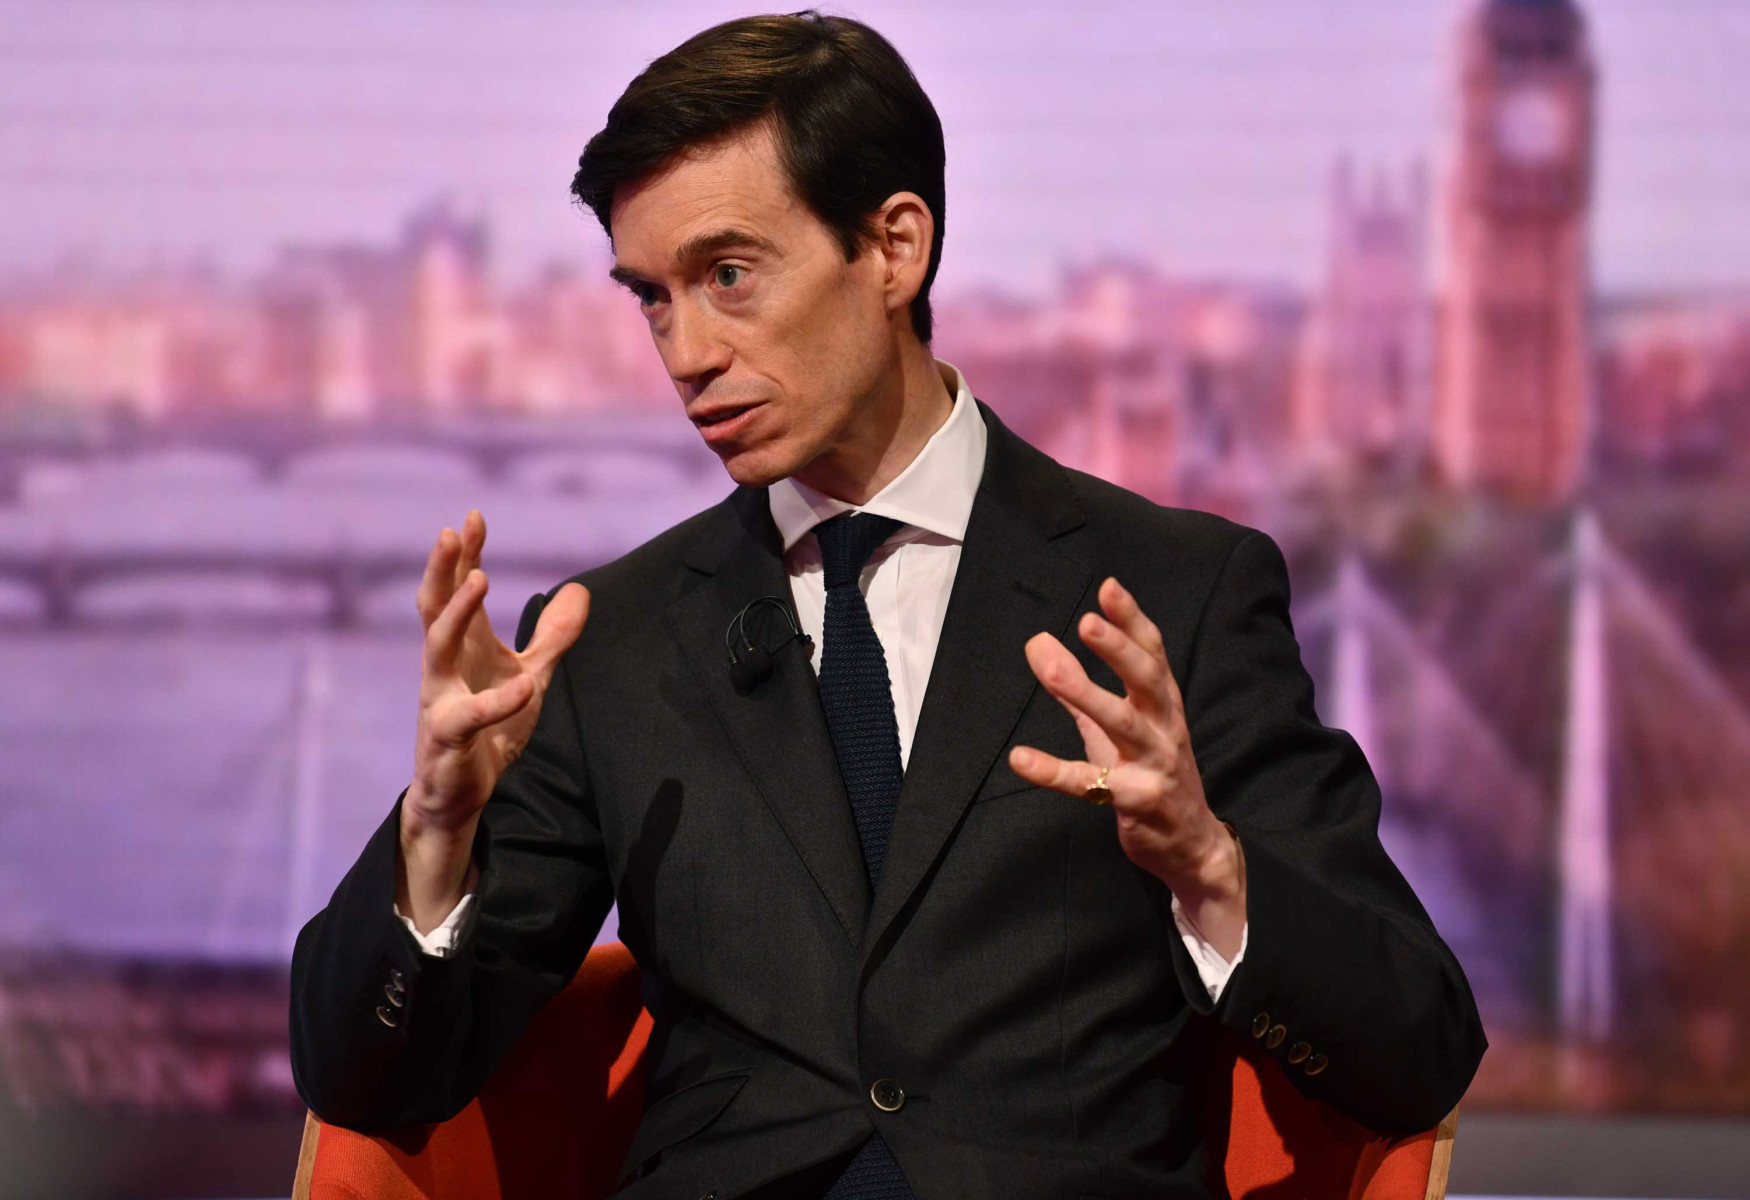 PM hopeful Rory Stewart has been dubbed 'the David to Boris Goliath'